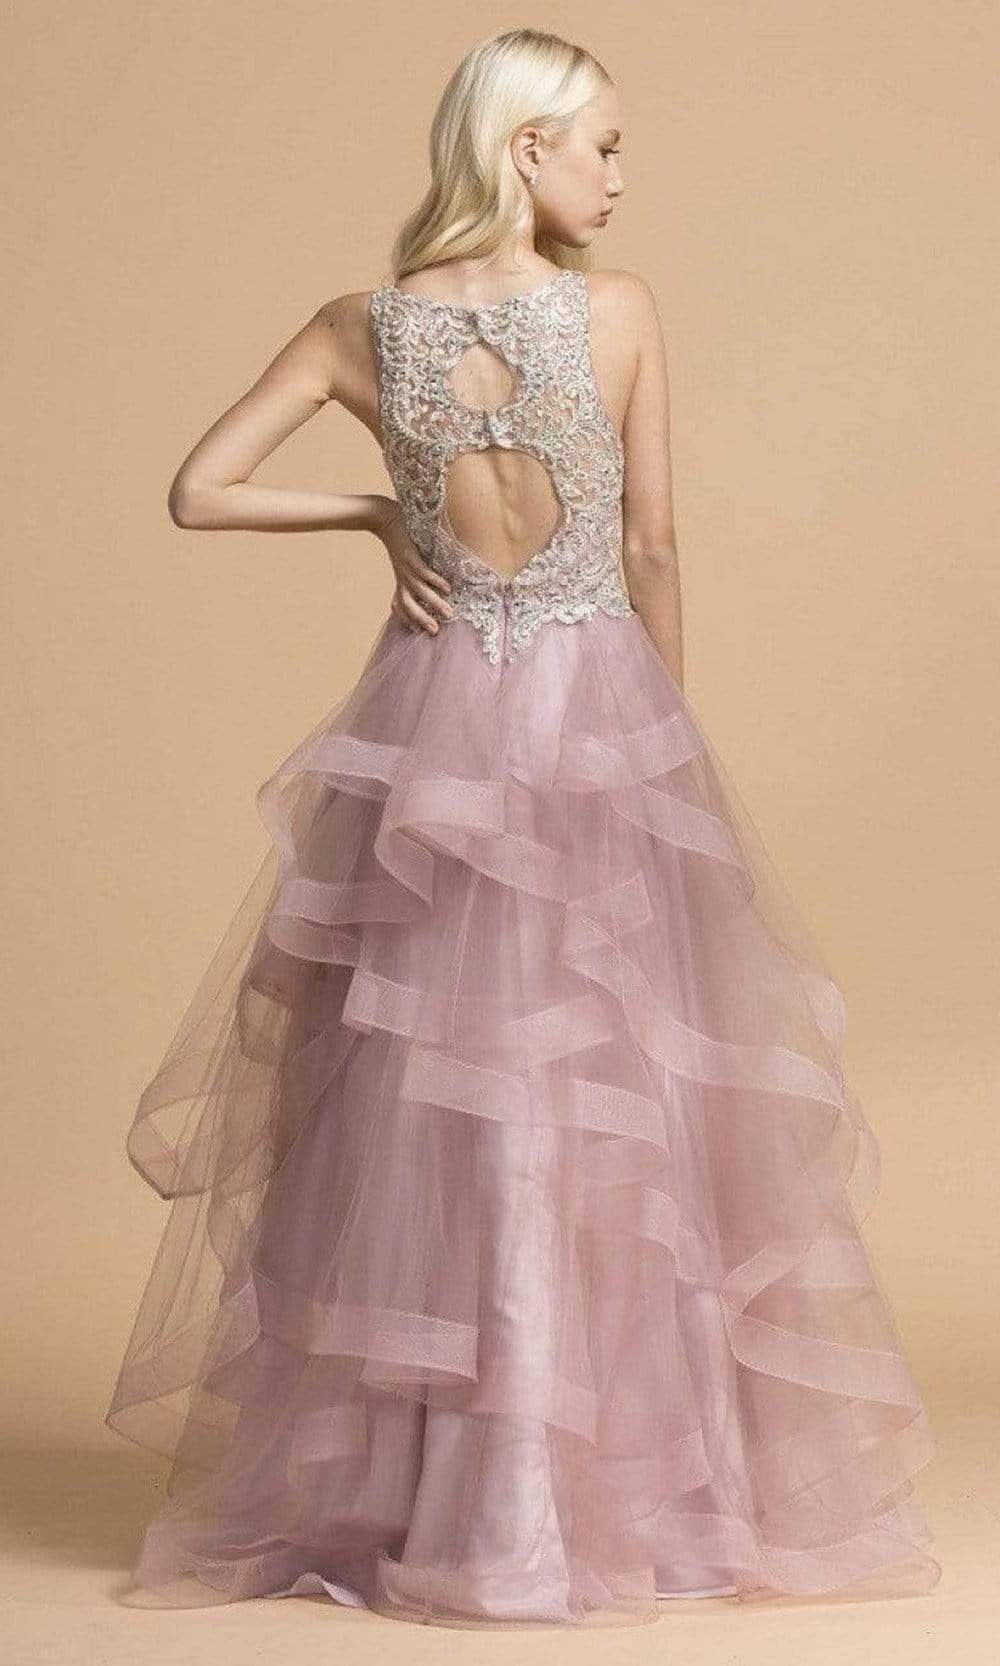 Aspeed Design - L2160 Lace Bodice Tiered Tulle Dress Prom Dresses